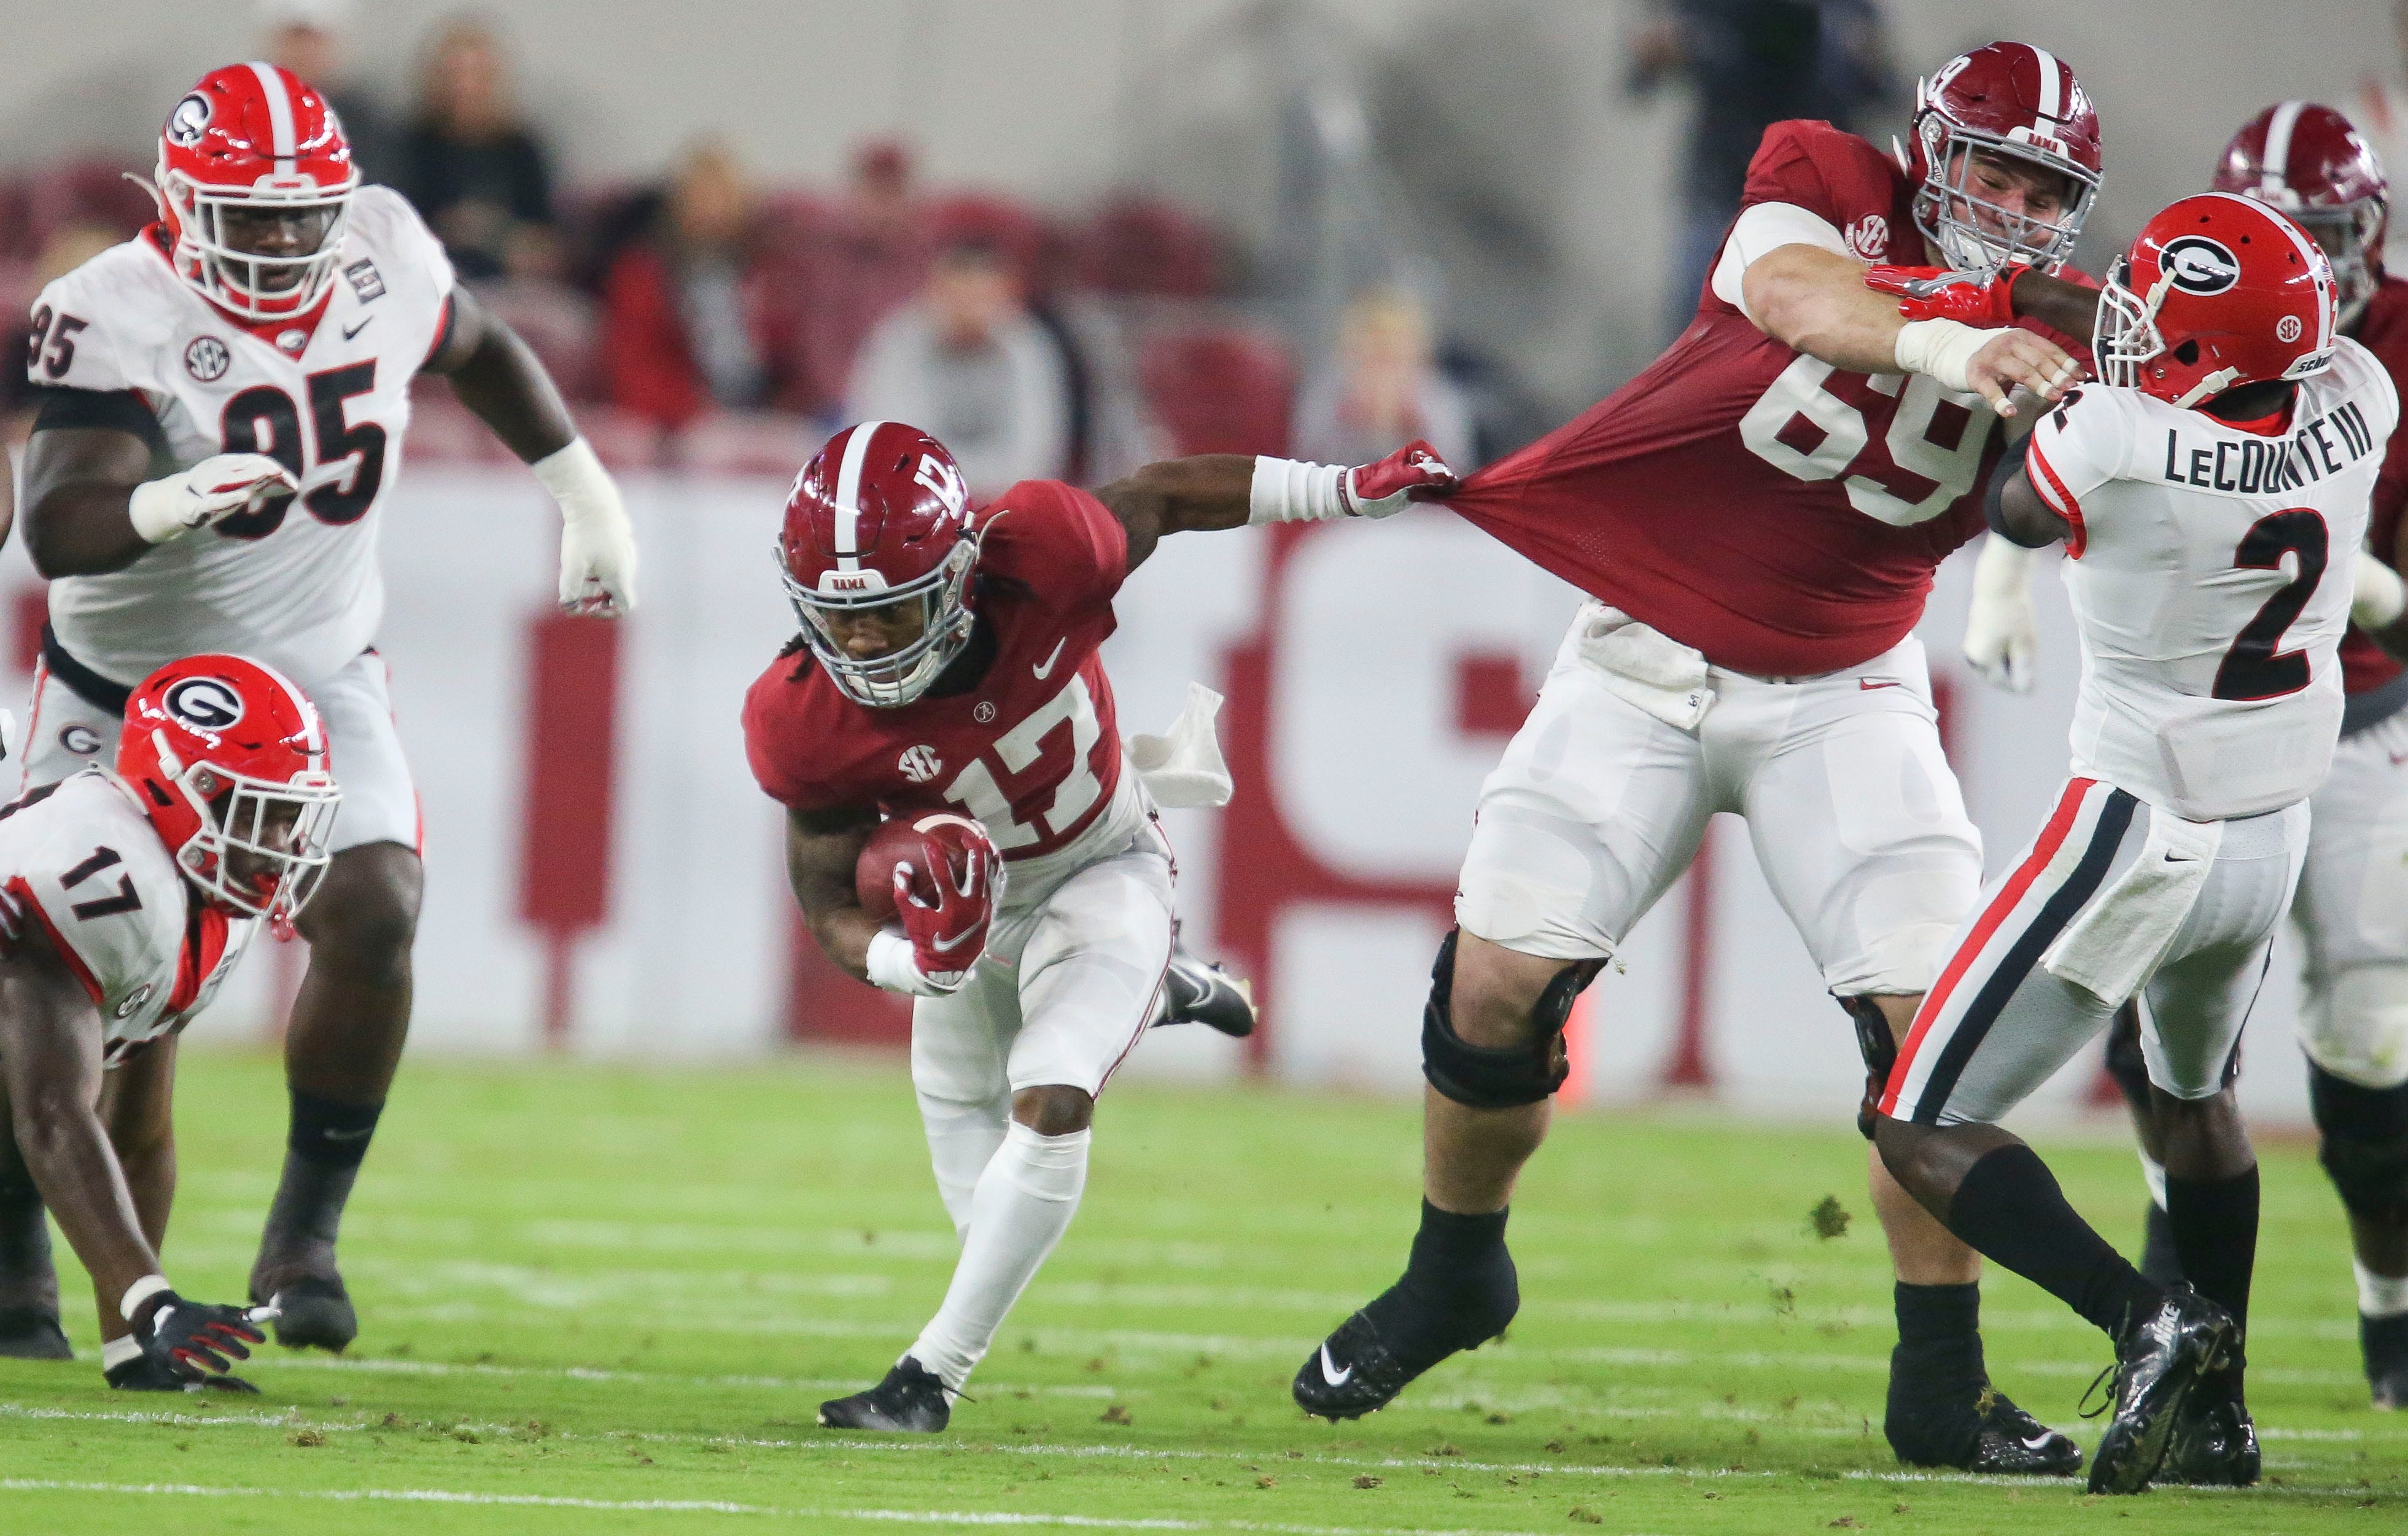 Alabama wide receiver Jaylen Waddle (17) grabs Alabama offensive lineman Landon Dickerson (69) by the jersey sa he slingshots through a hole during Alabama's 41-24 win over Georgia in Bryant-Denny Stadium Saturday, Oct. 17, 2020. [Staff Photo/Gary Cosby Jr.]